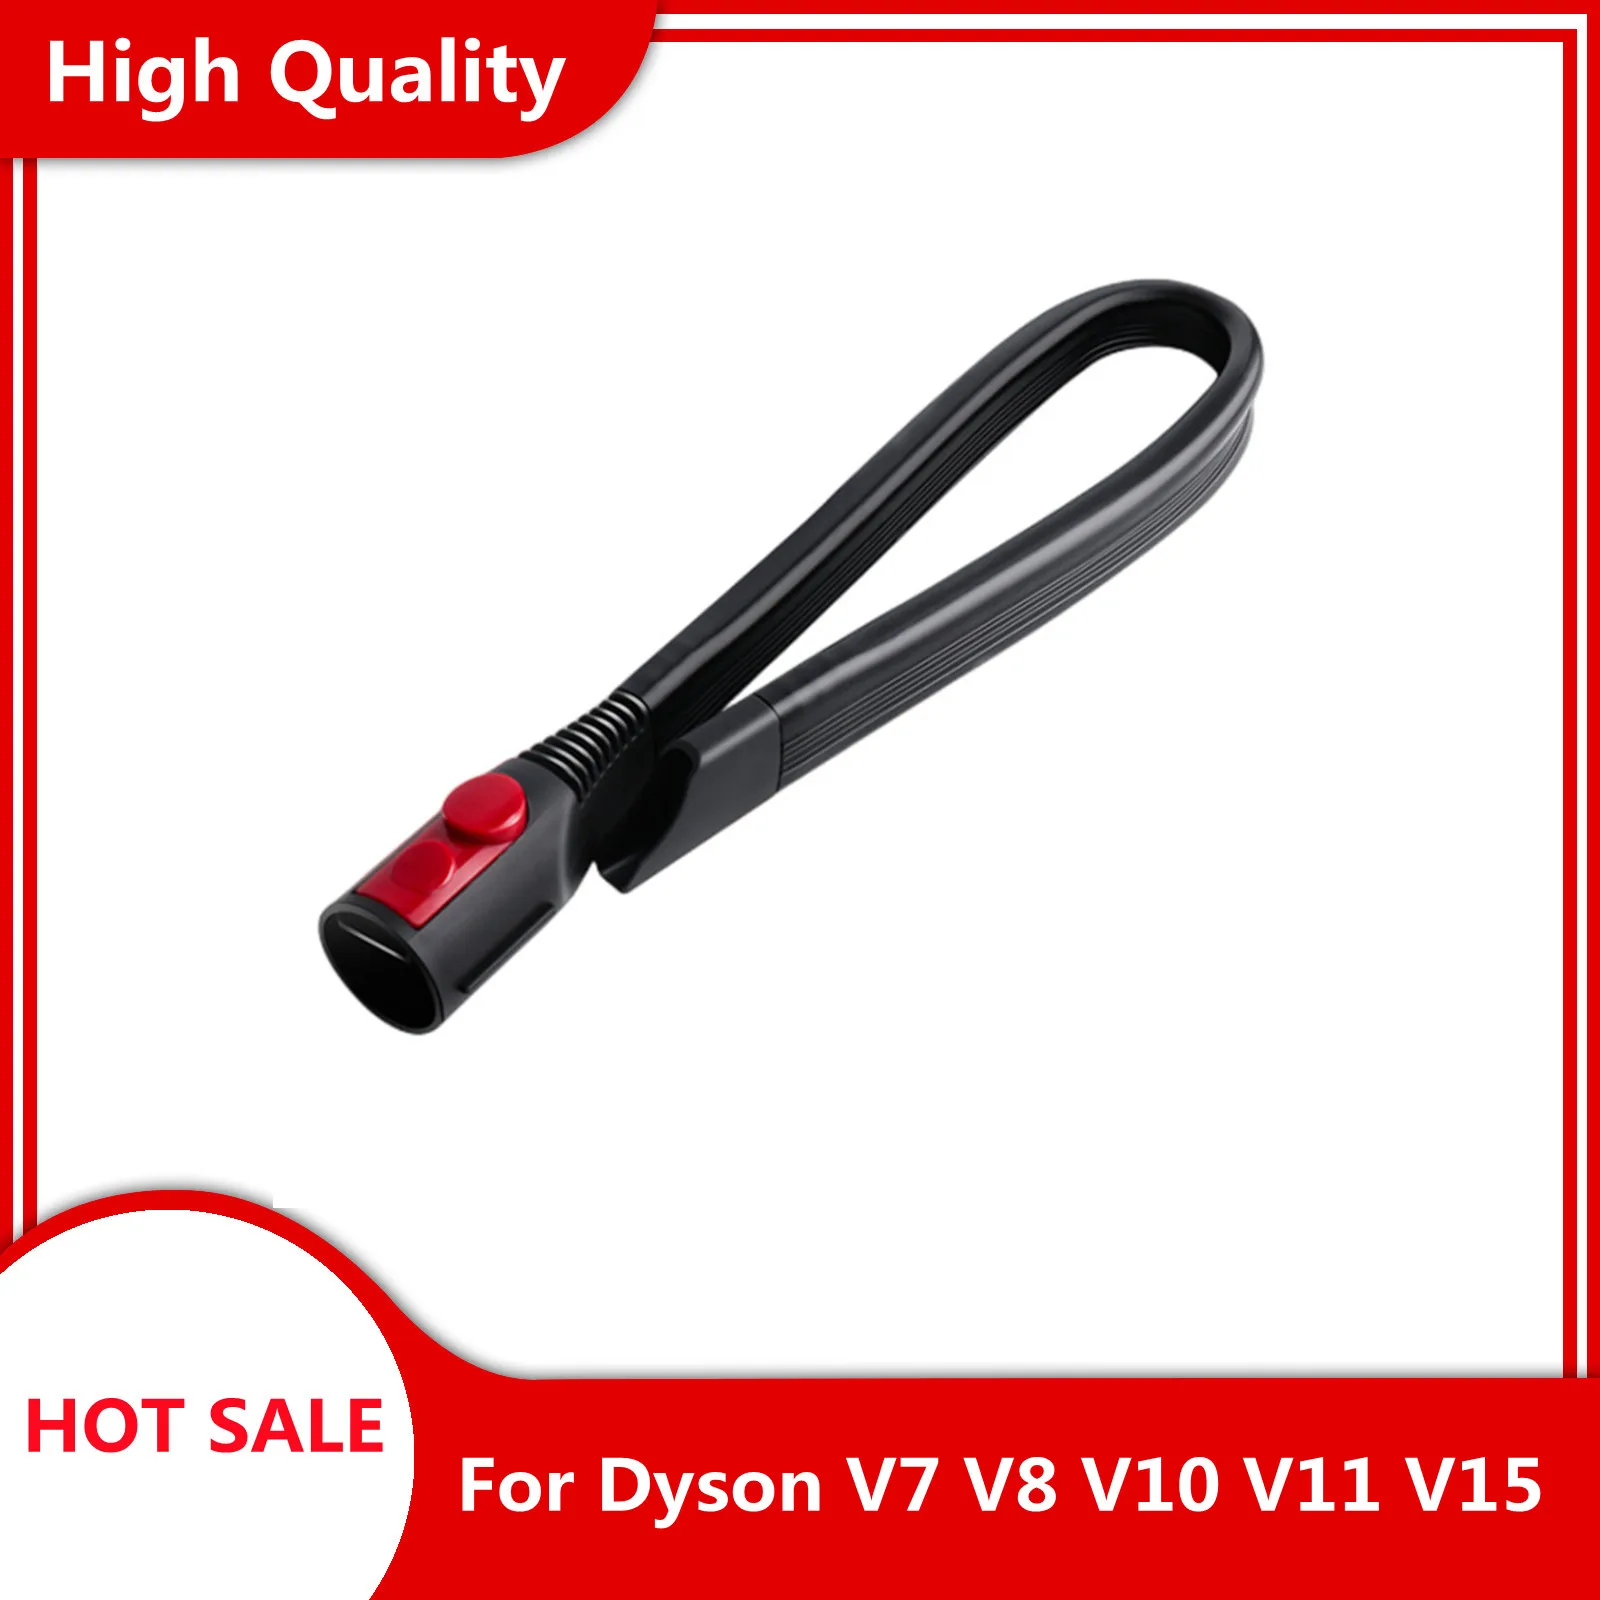 Suitable for Corners and Gaps Cleaning Flexible Crevice Tool for Dyson Cordless Vacuum Cleaners V7 V8 V10 V11 V15 3pcs mobile phone curved lcd screen opening tool double head ultra thin flexible stainless steel anti static plastic pry spudger